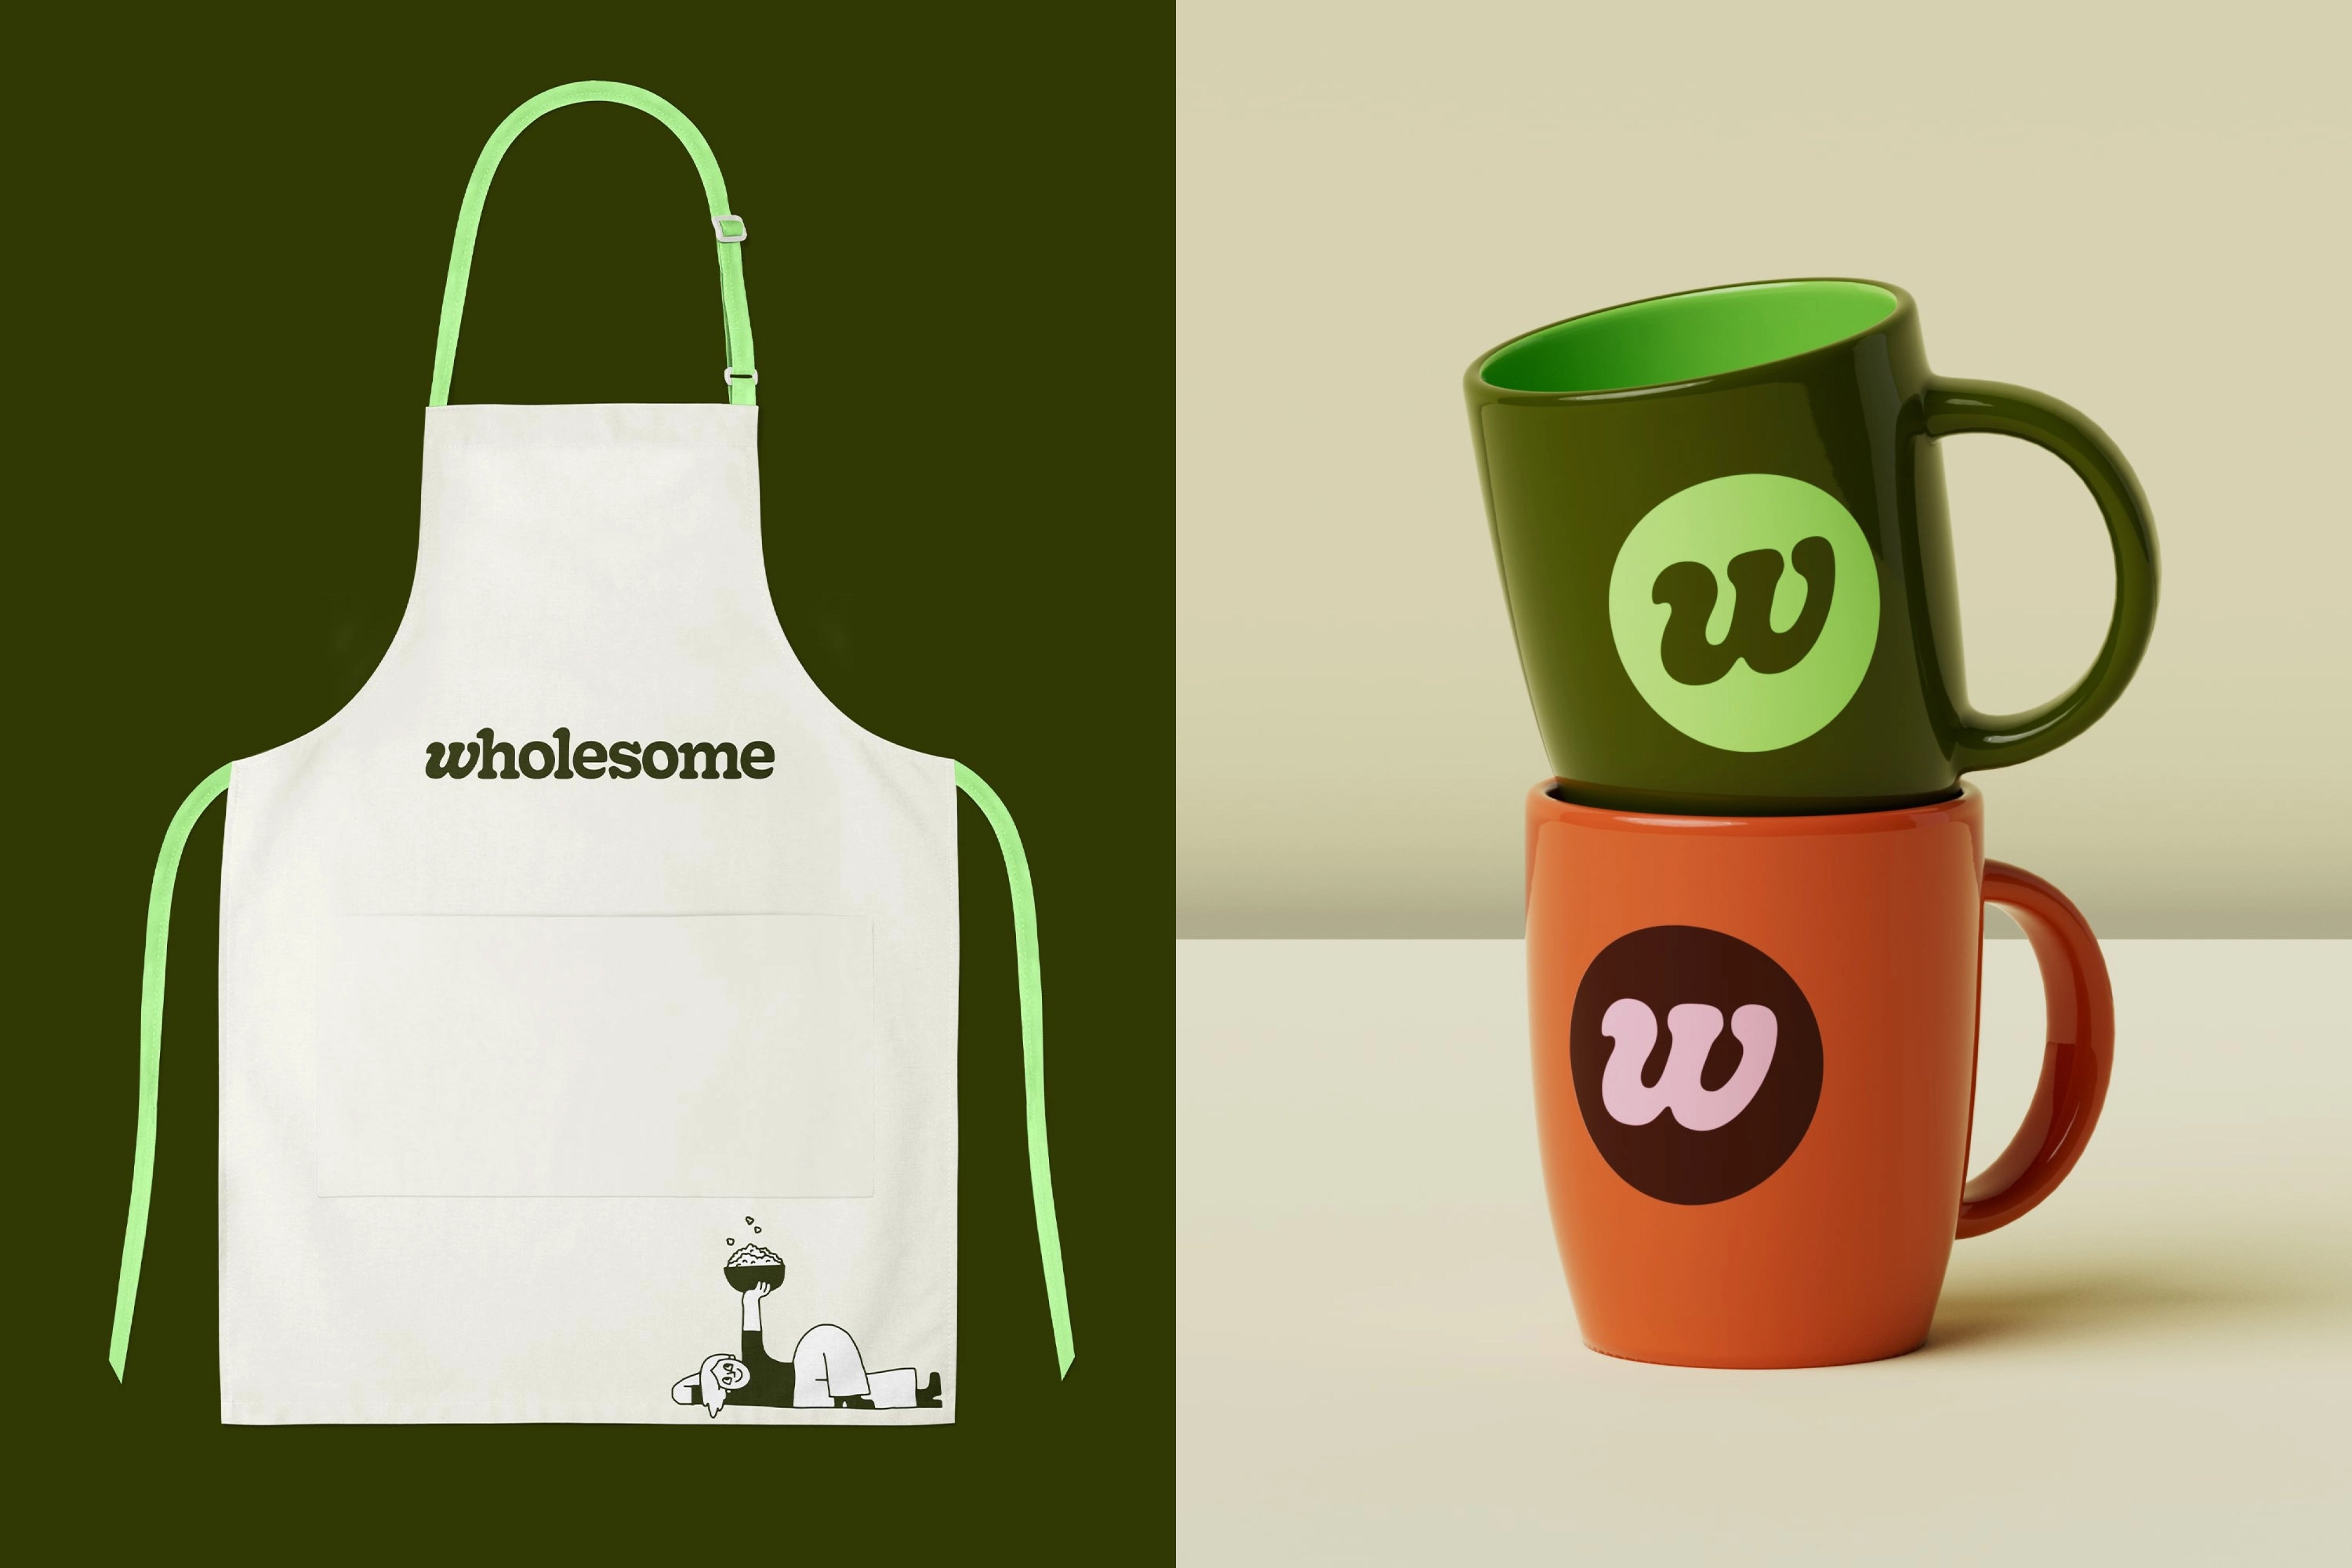 Brand identity and branded merchandise including apron and mugs for Australian online grocer Wholesome designed by Universal Favourite